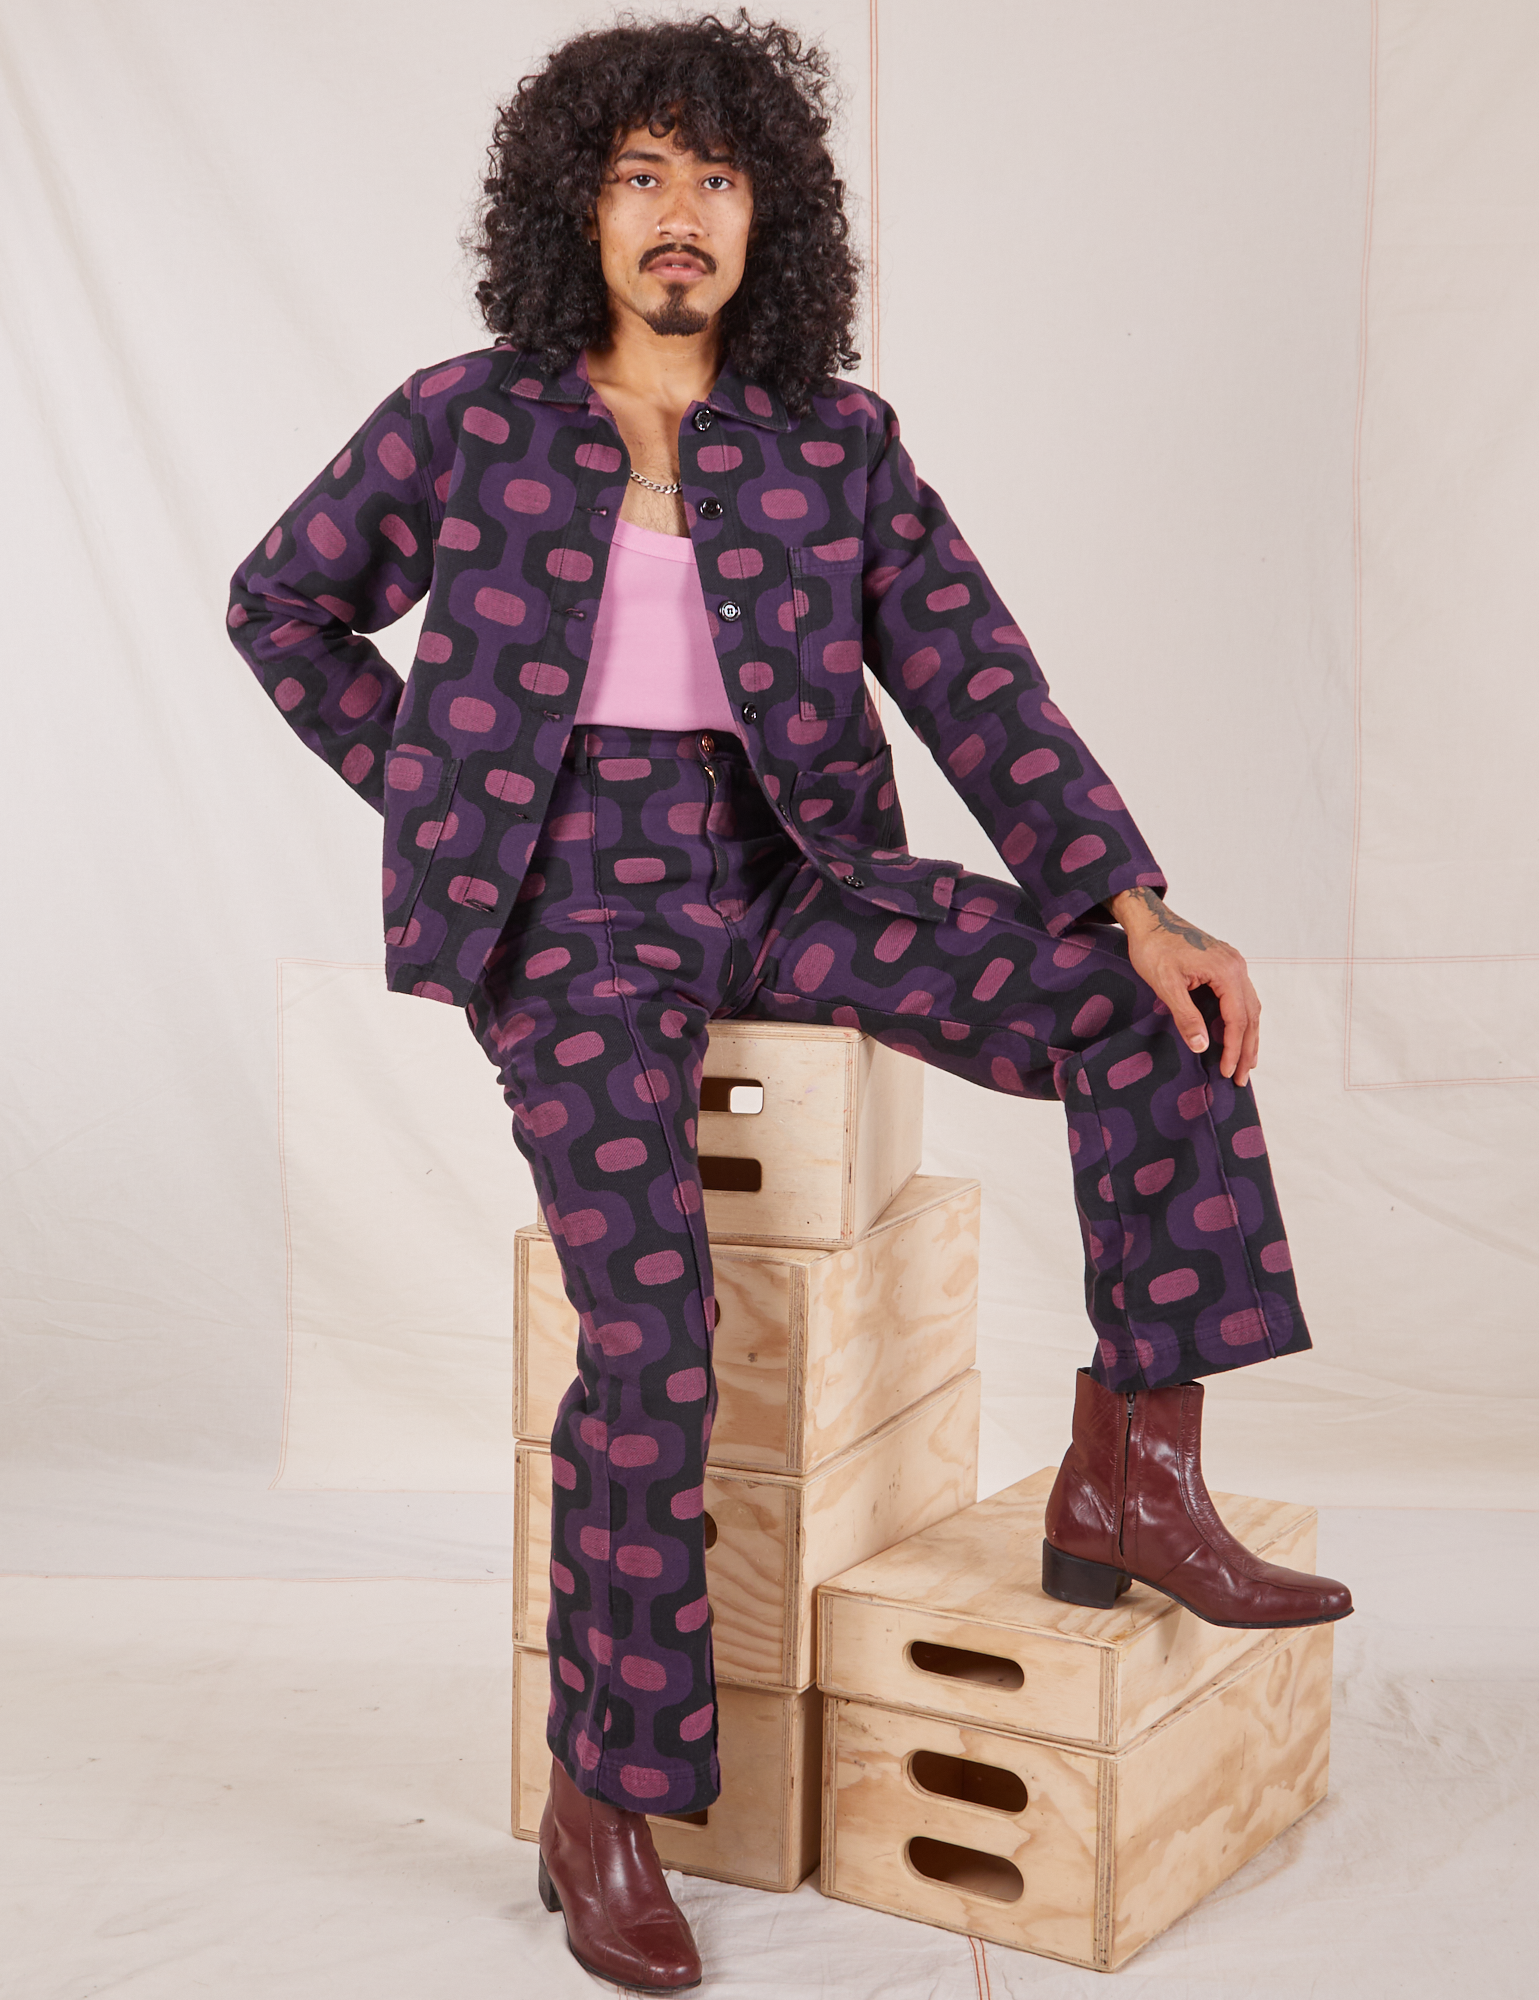 Jesse is wearing Western Pants in Purple Tile Jacquard and matching Work Jacket